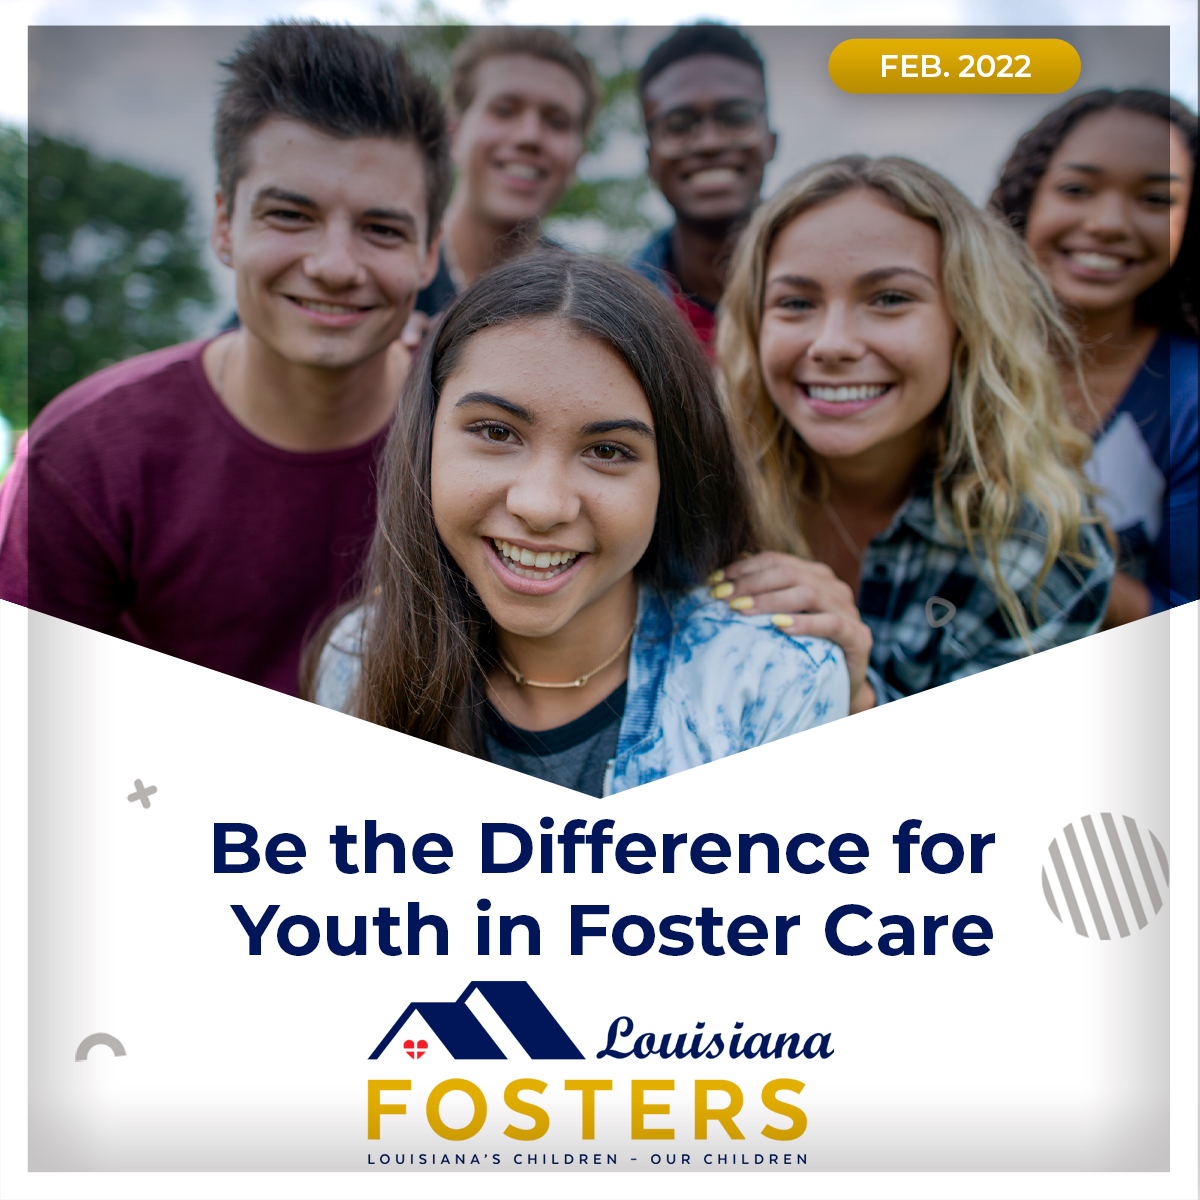 Louisiana Fosters – Be the Difference for Youth in Foster Care